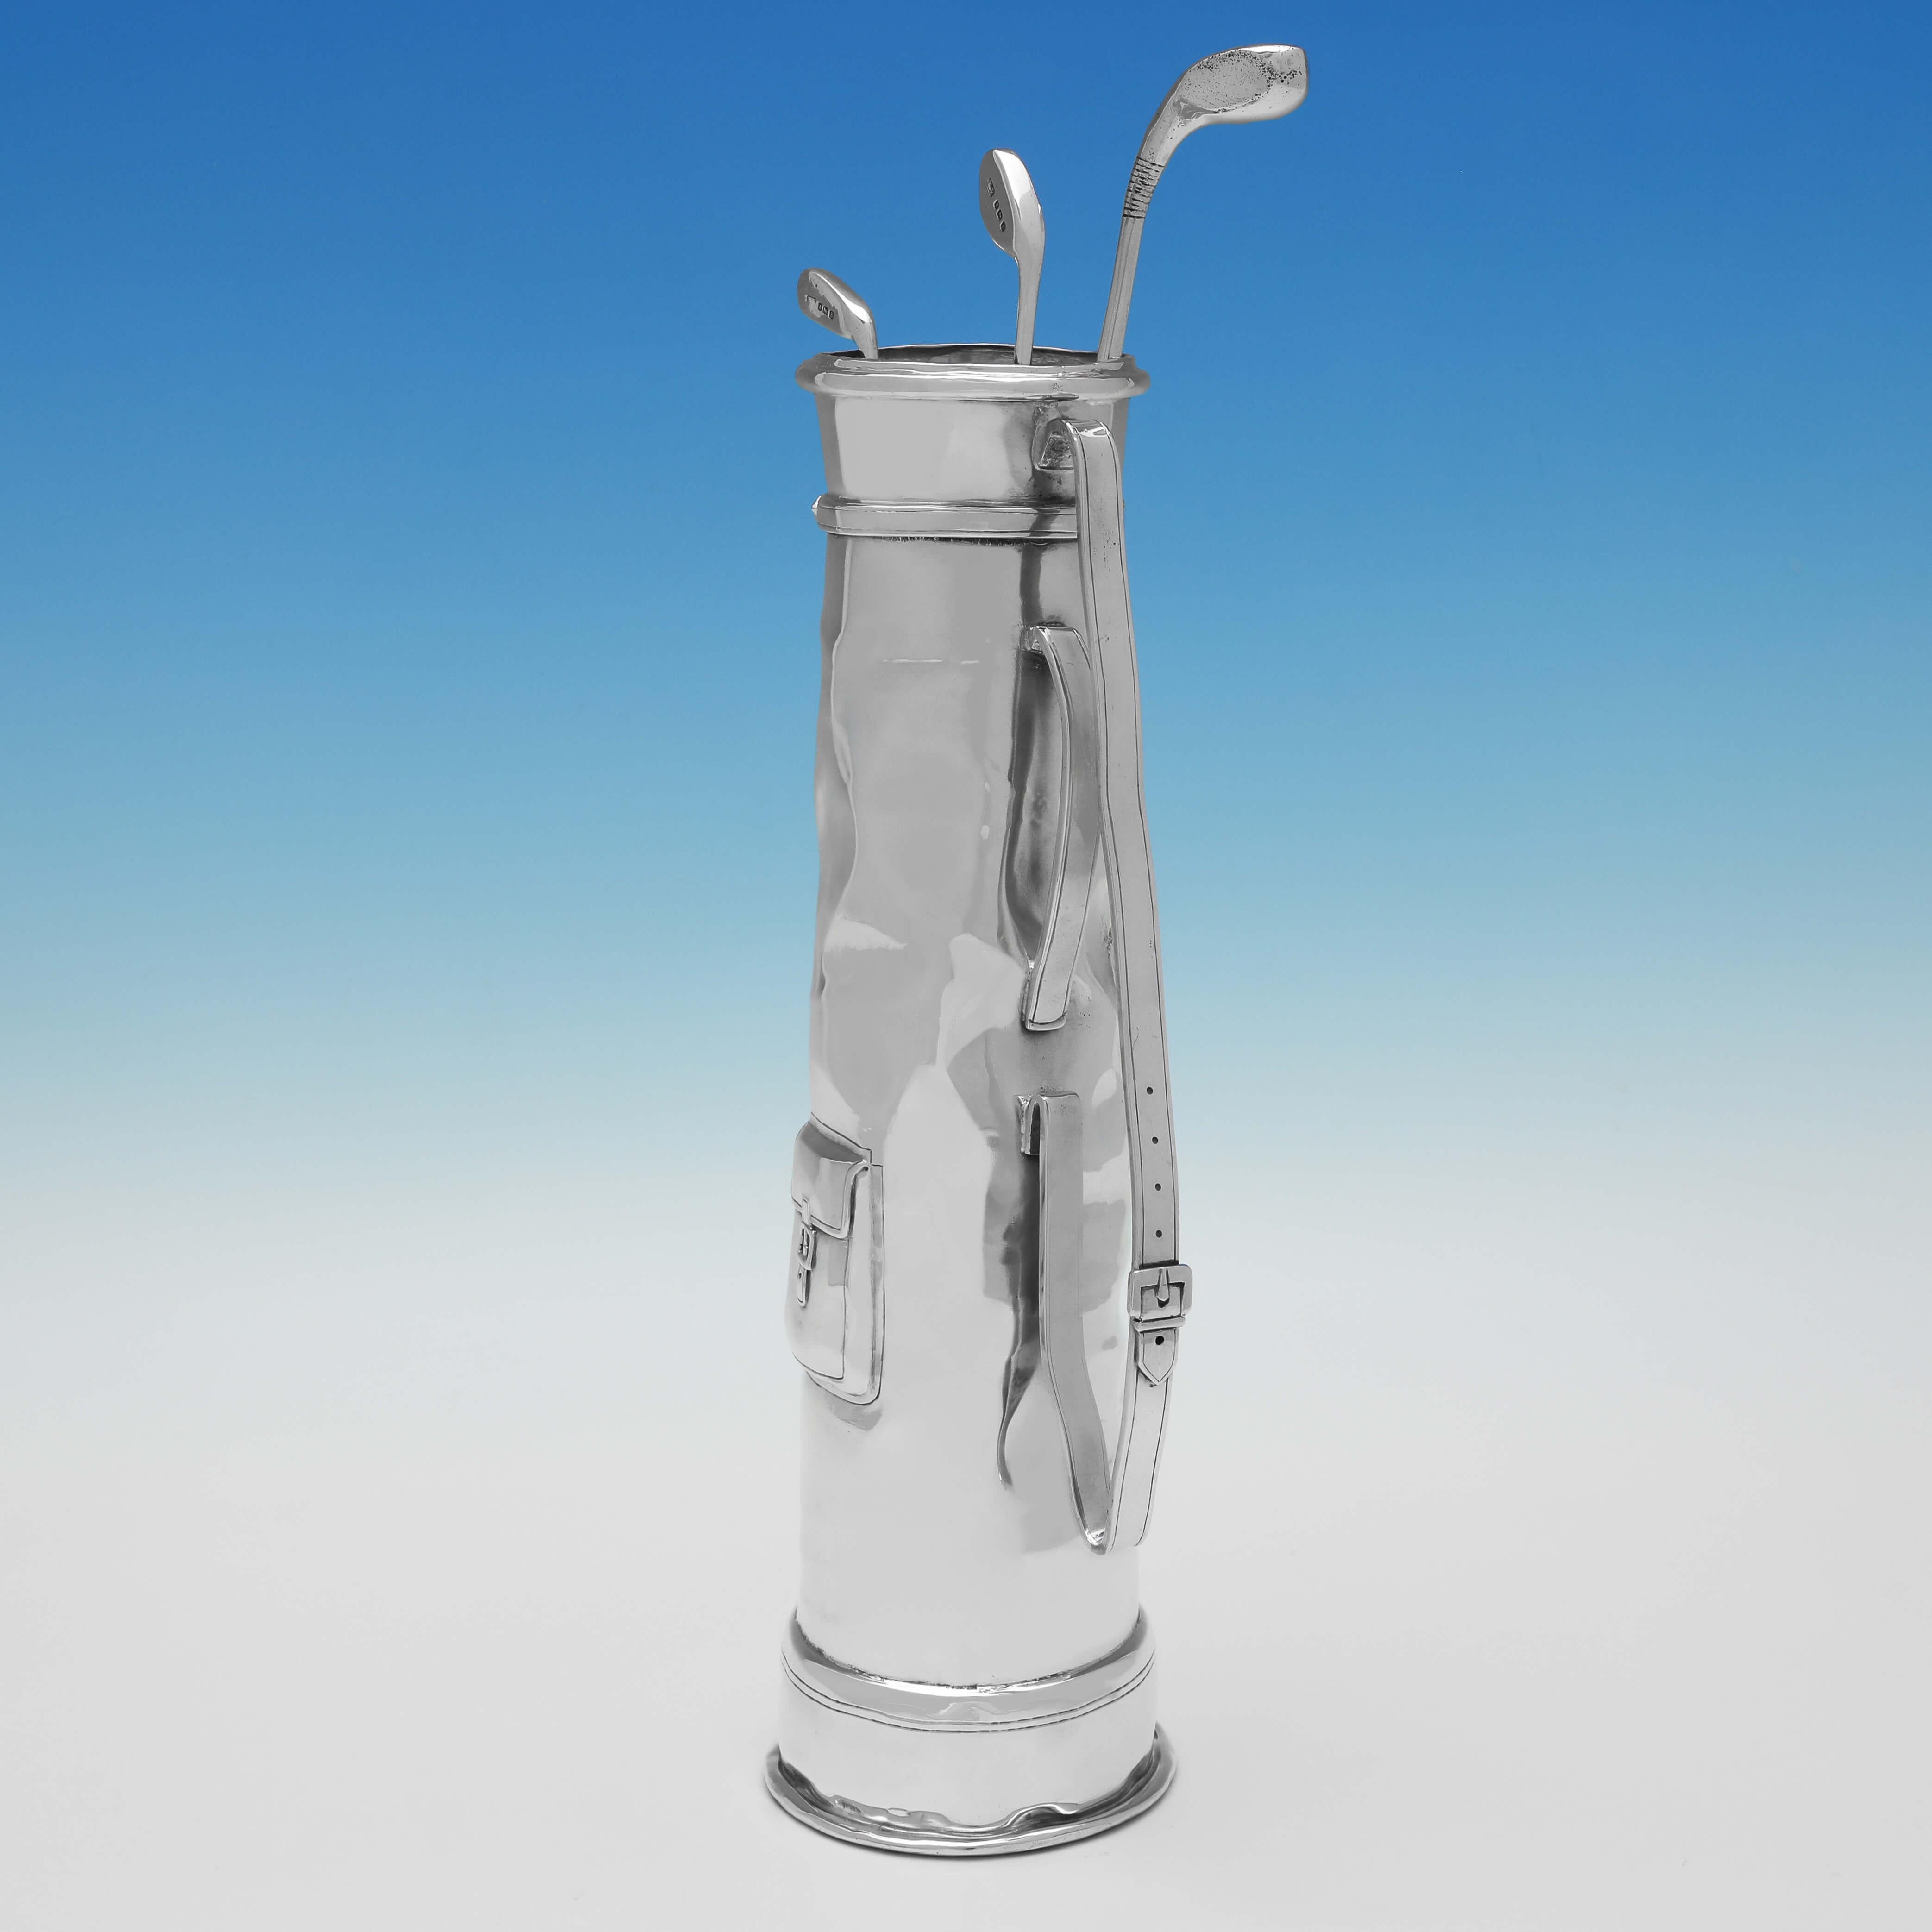 Hallmarked in Birmingham in 1926 by Thomas Fattorini, this very stylish golf trophy takes the form of a Sterling Silver Golf Bag & 3 Golf Clubs, which have been realistically modelled. The golf bag measures 10.5